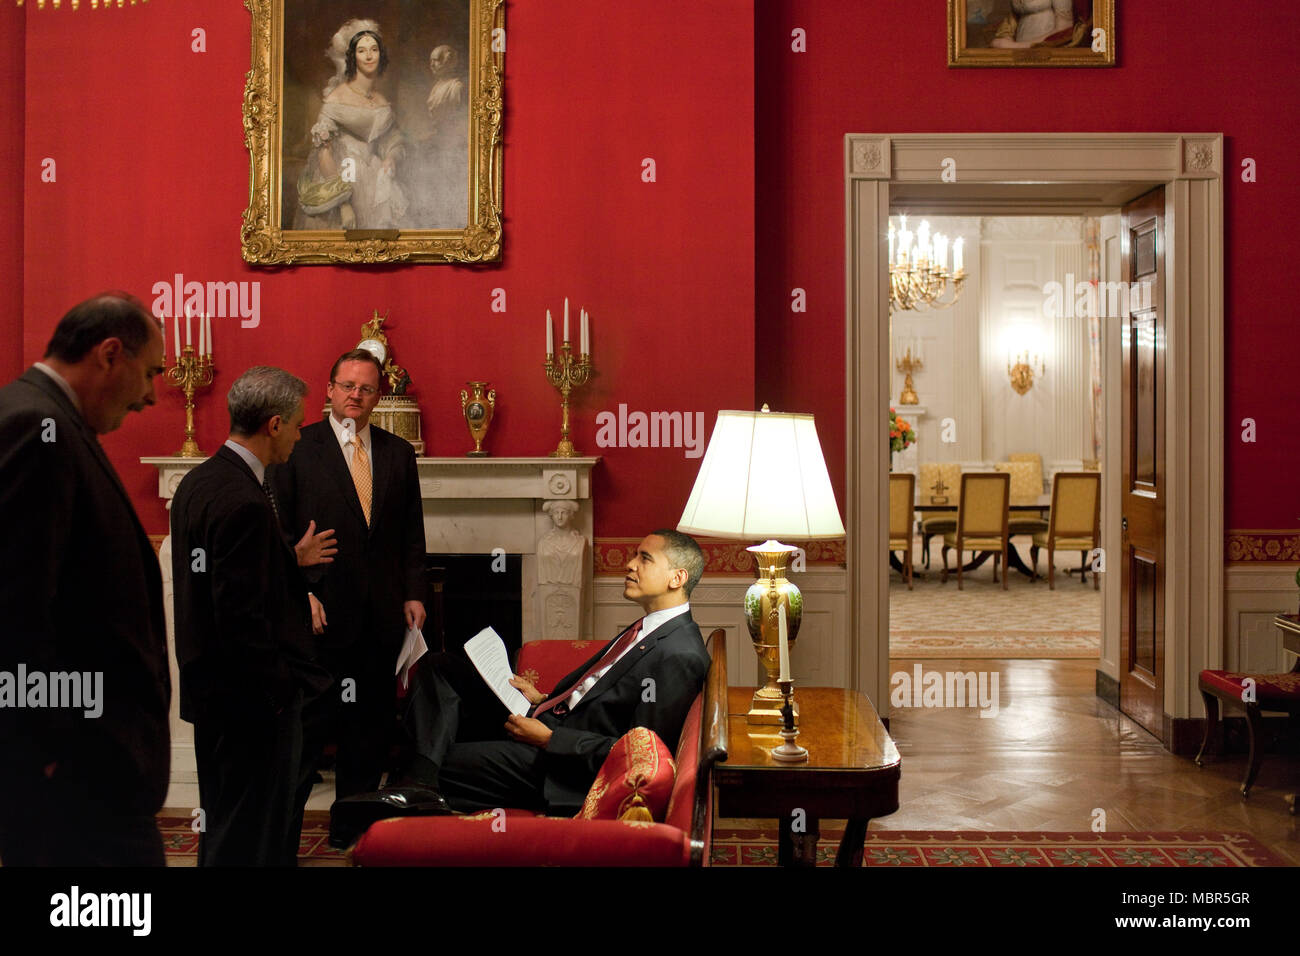 President Barack Obama with  Senior Advisor David Axelrod, Chief of Staff Rahm Emanuel and Press Secretary Robert Gibbs in the Red Room prior to Live Prime Time Press Conference in East Room 3/24/09. .Official White House Photo by Pete Souza Stock Photo